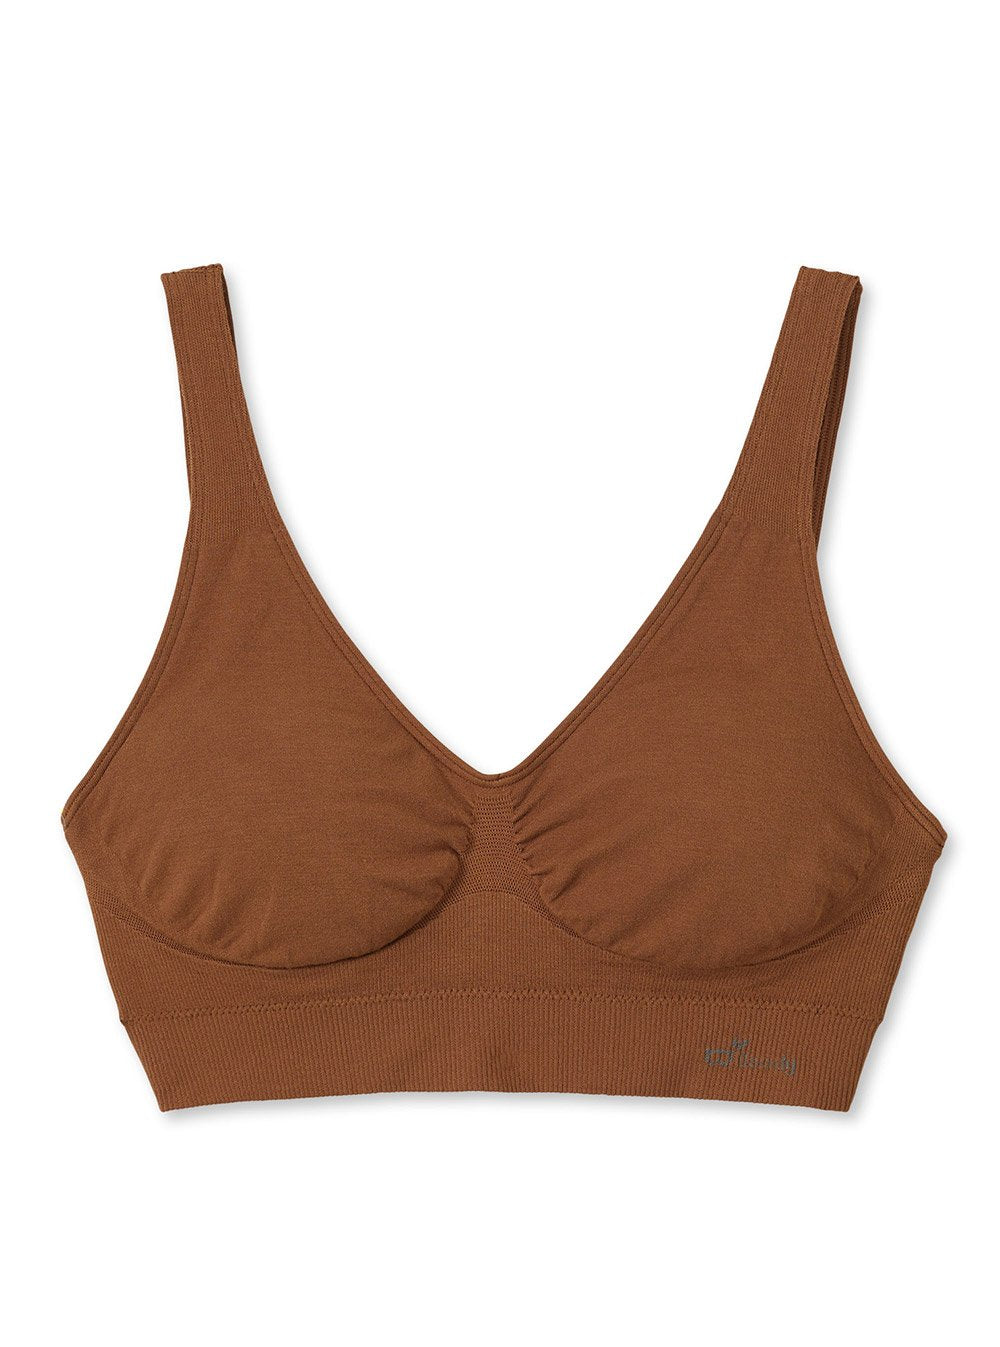 Bamboo Shaper Bra from Boody Eco Wear - Herbs from the Labyrinth